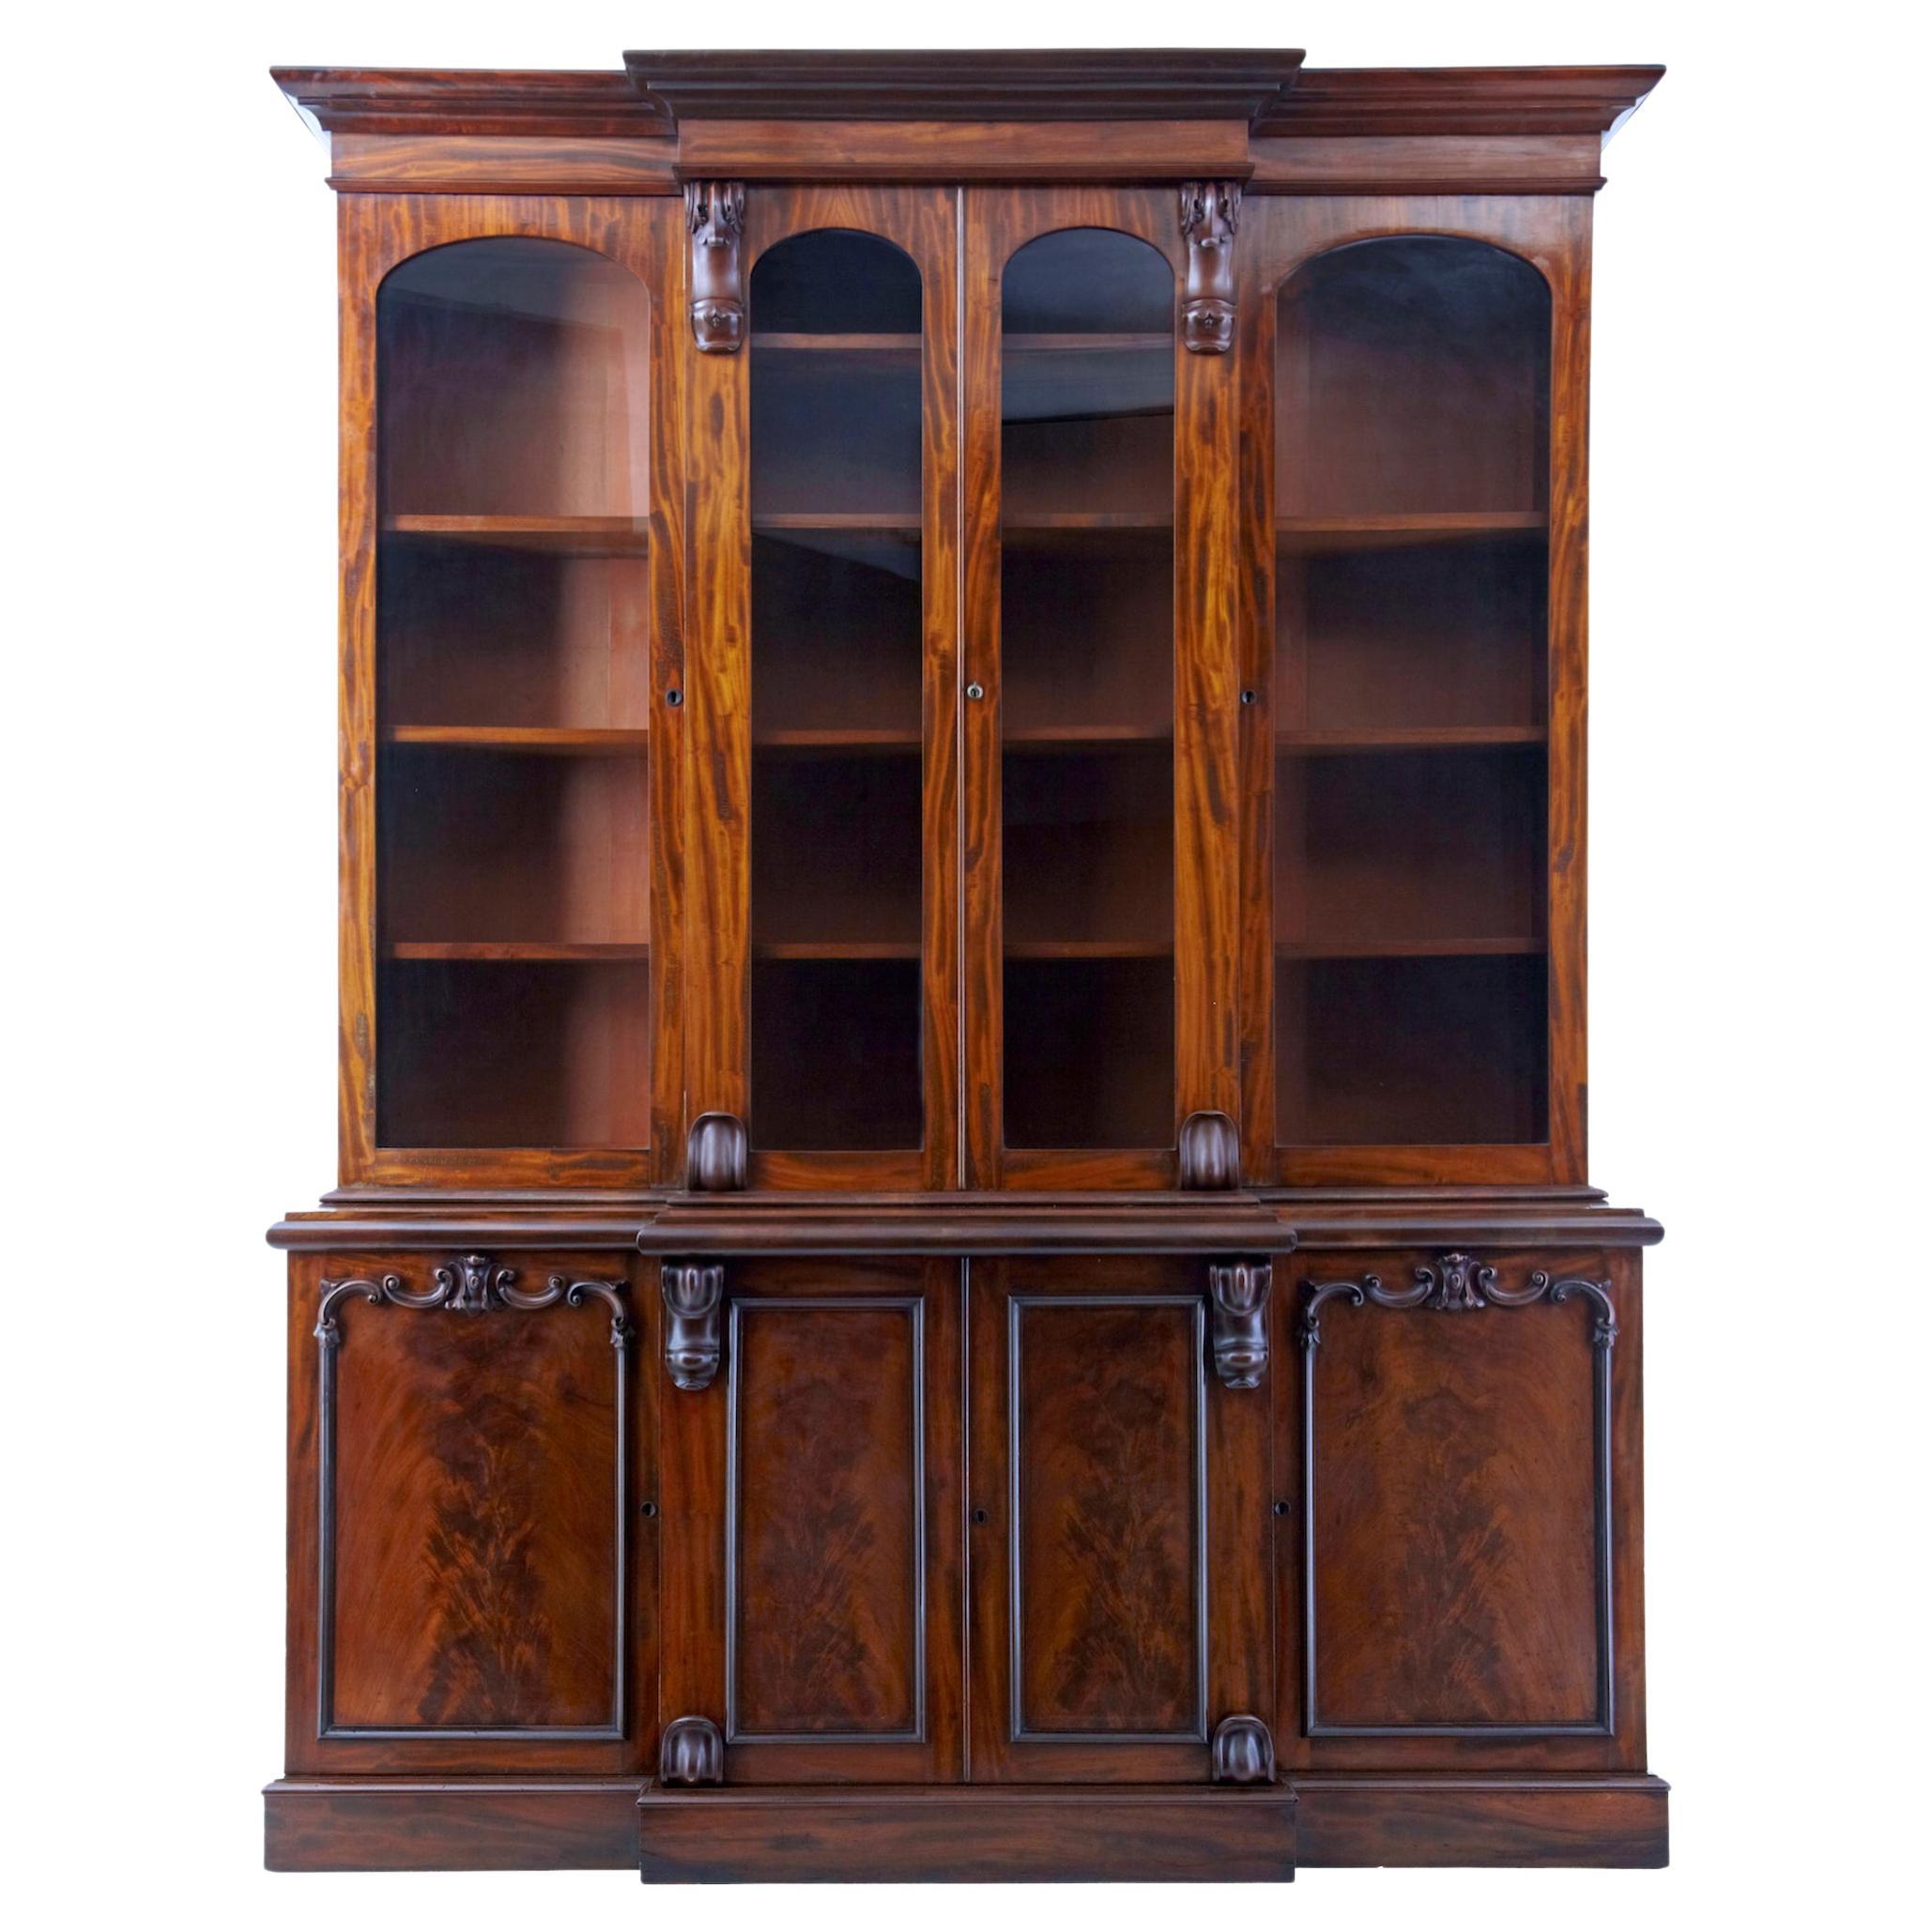 Superb quality early Victorian 19th century flame mahogany breakfront bookcase